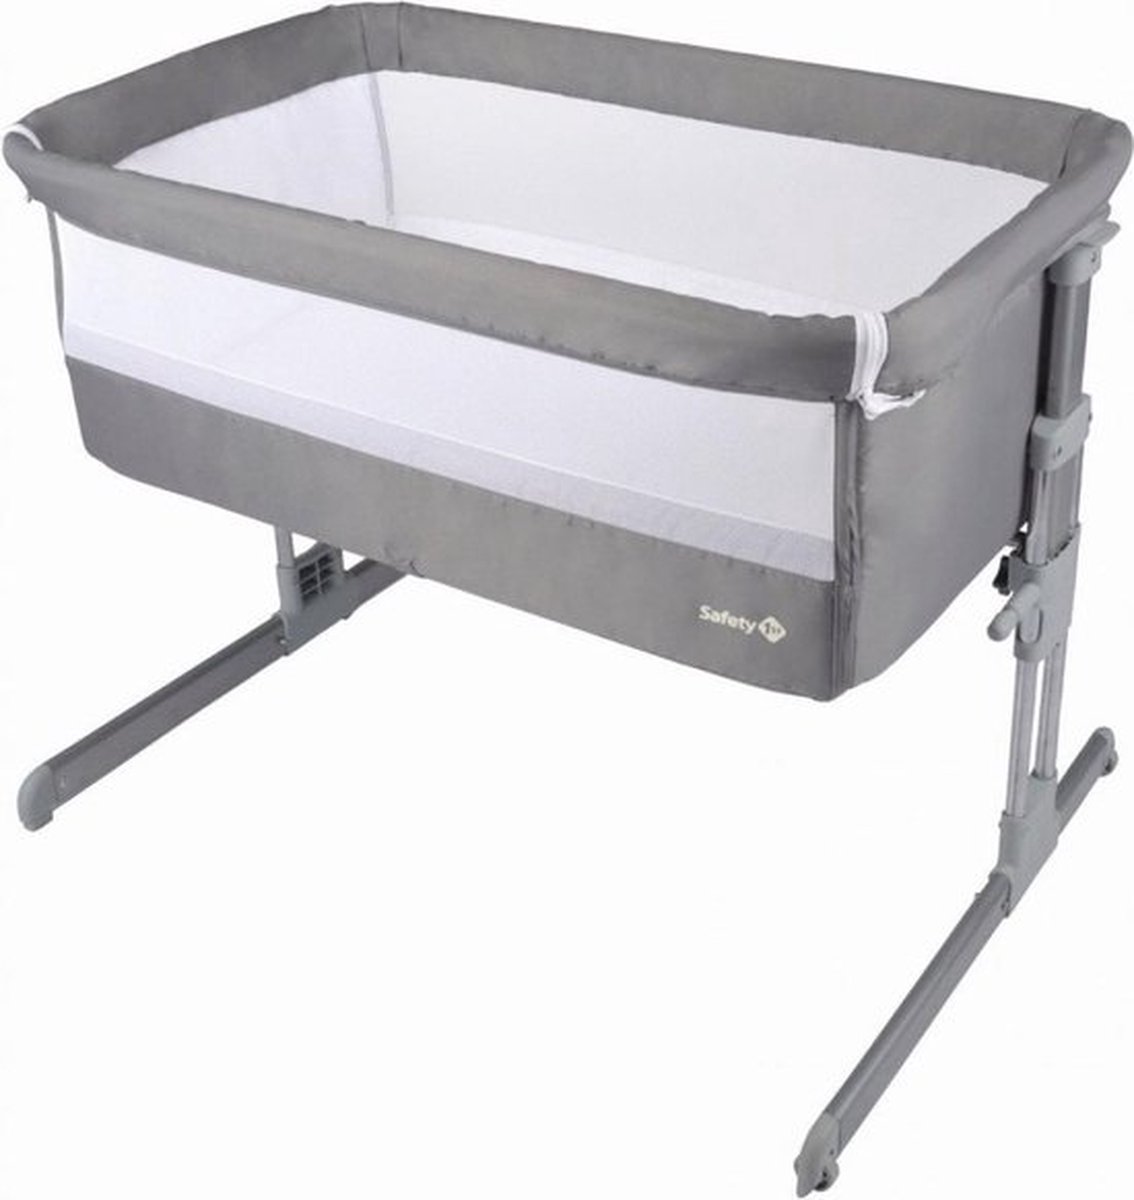 Safety 1st Calidoo Co-Sleeper - Warm Grey - Safety 1st